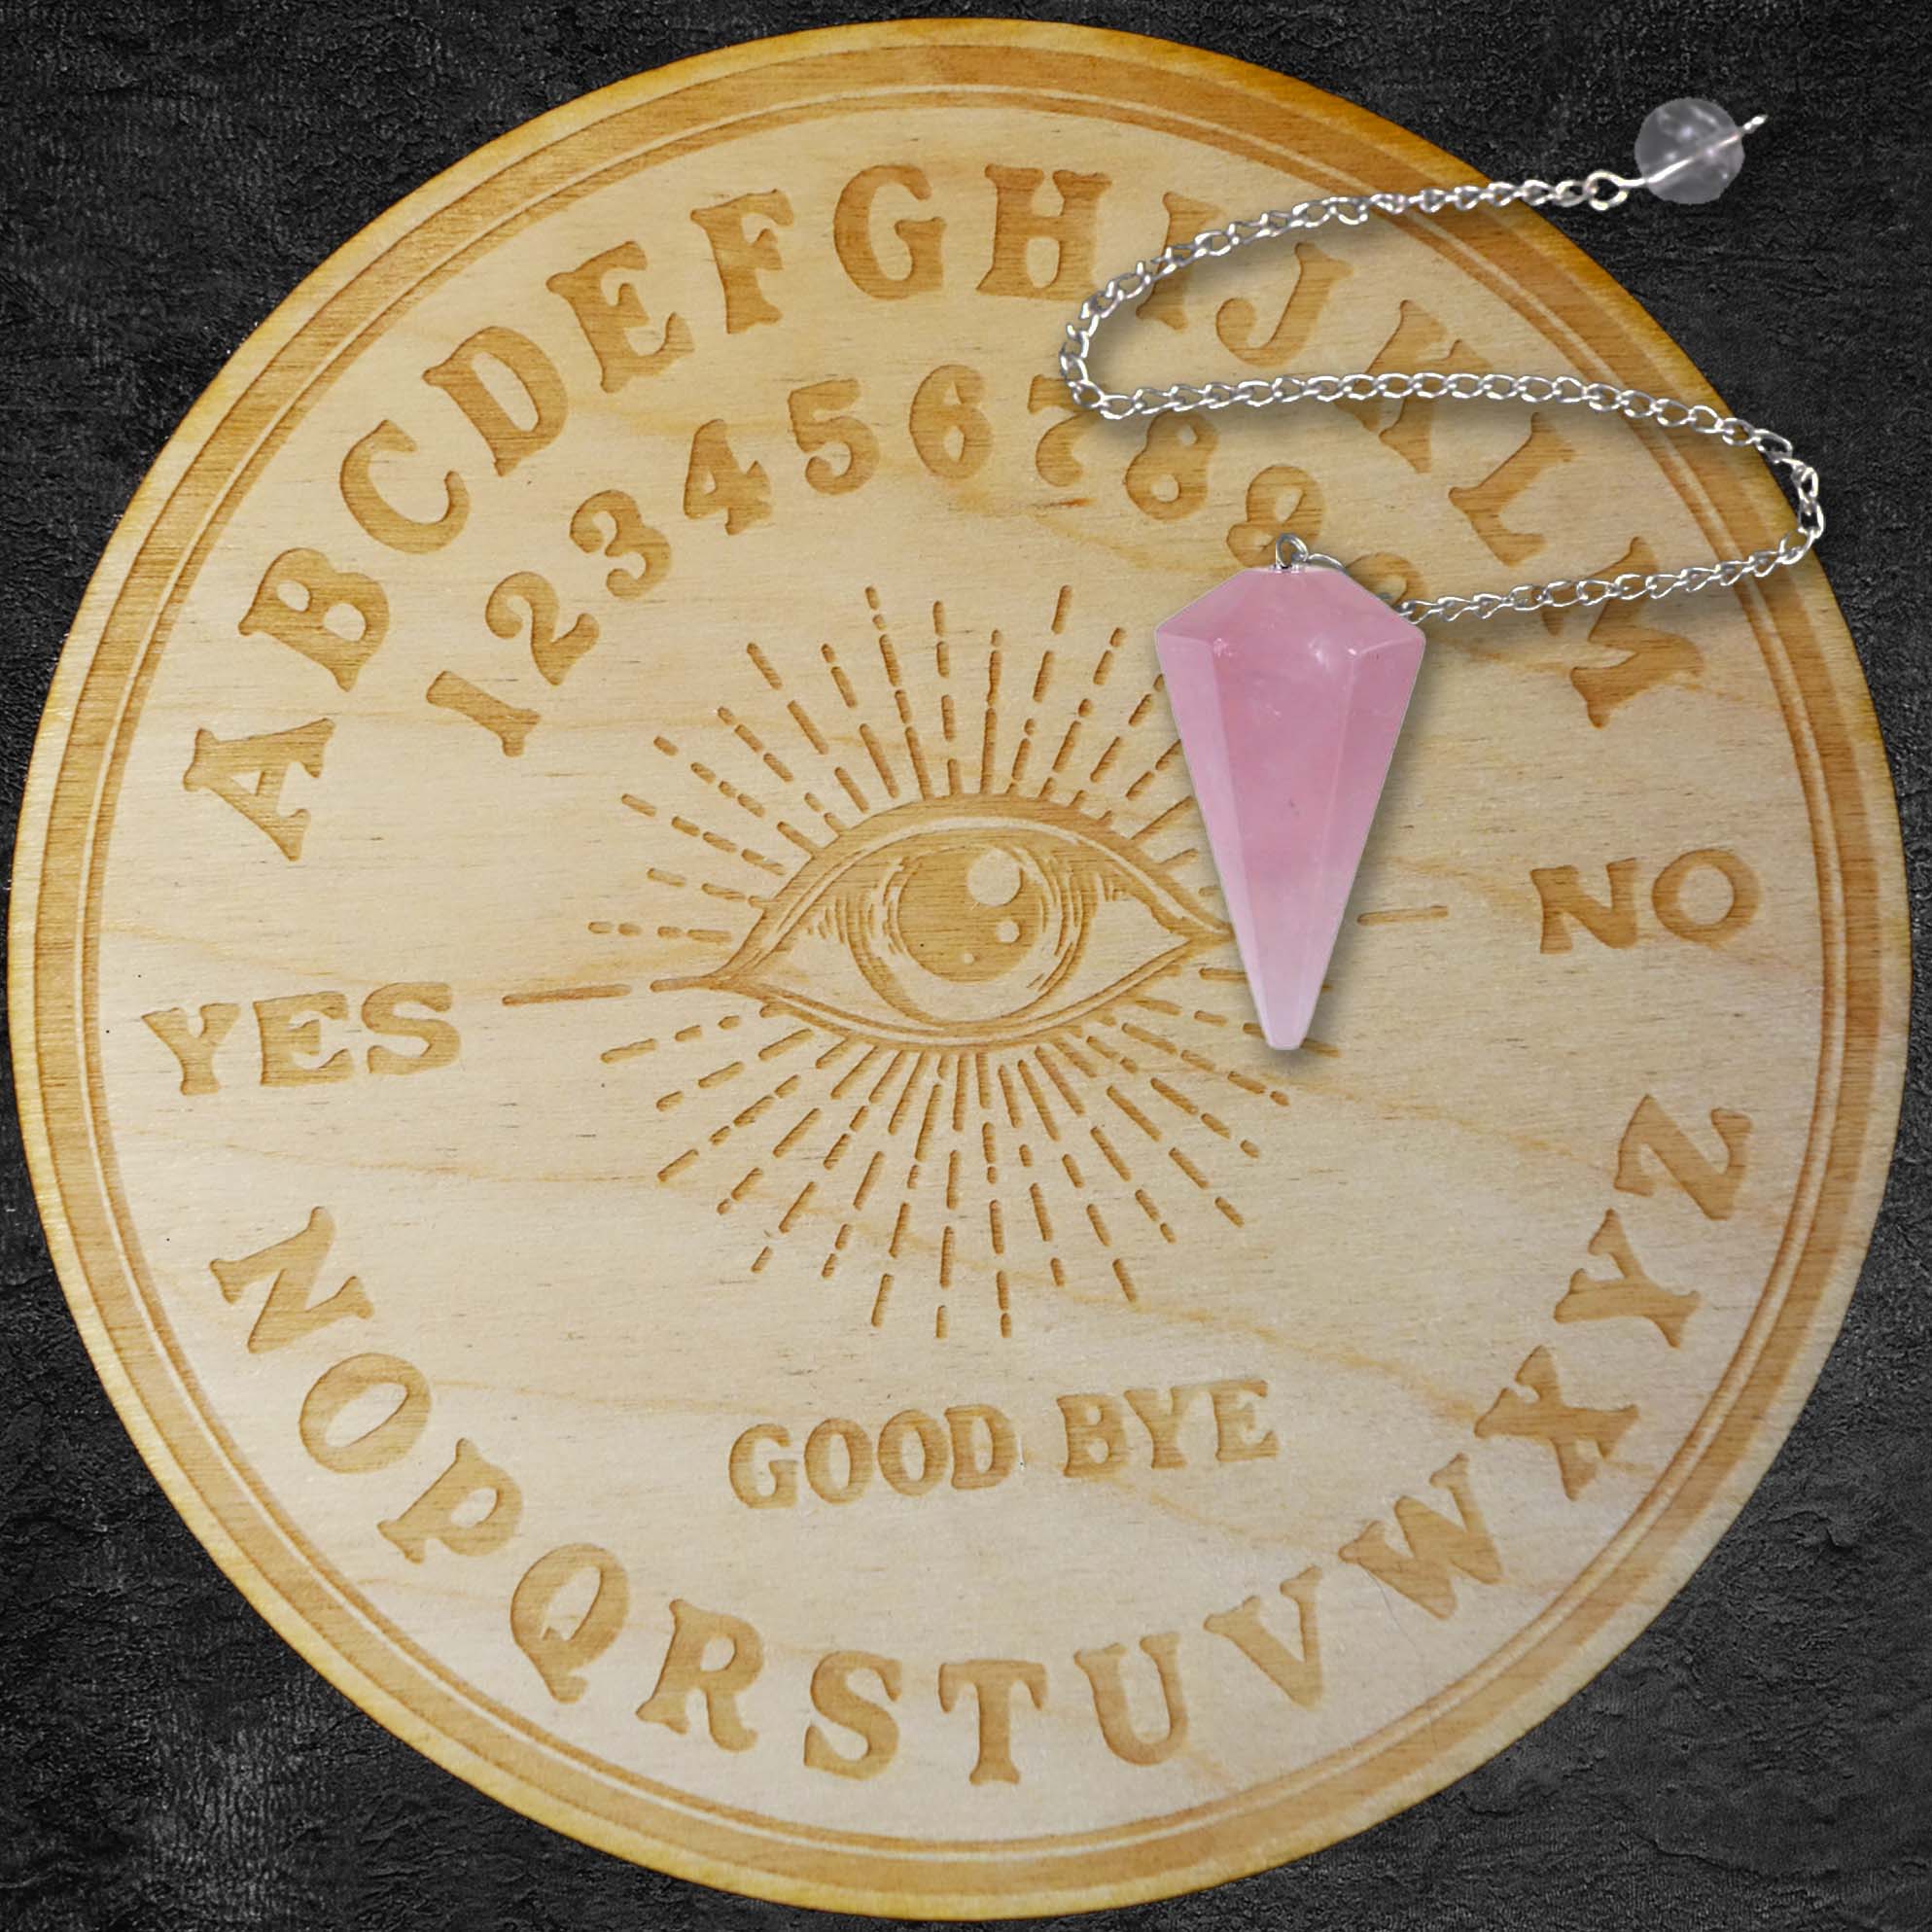 Copy of Classic Wooden Dowsing Kit with 10-inch Board and Crystal Pendulum Dowsing